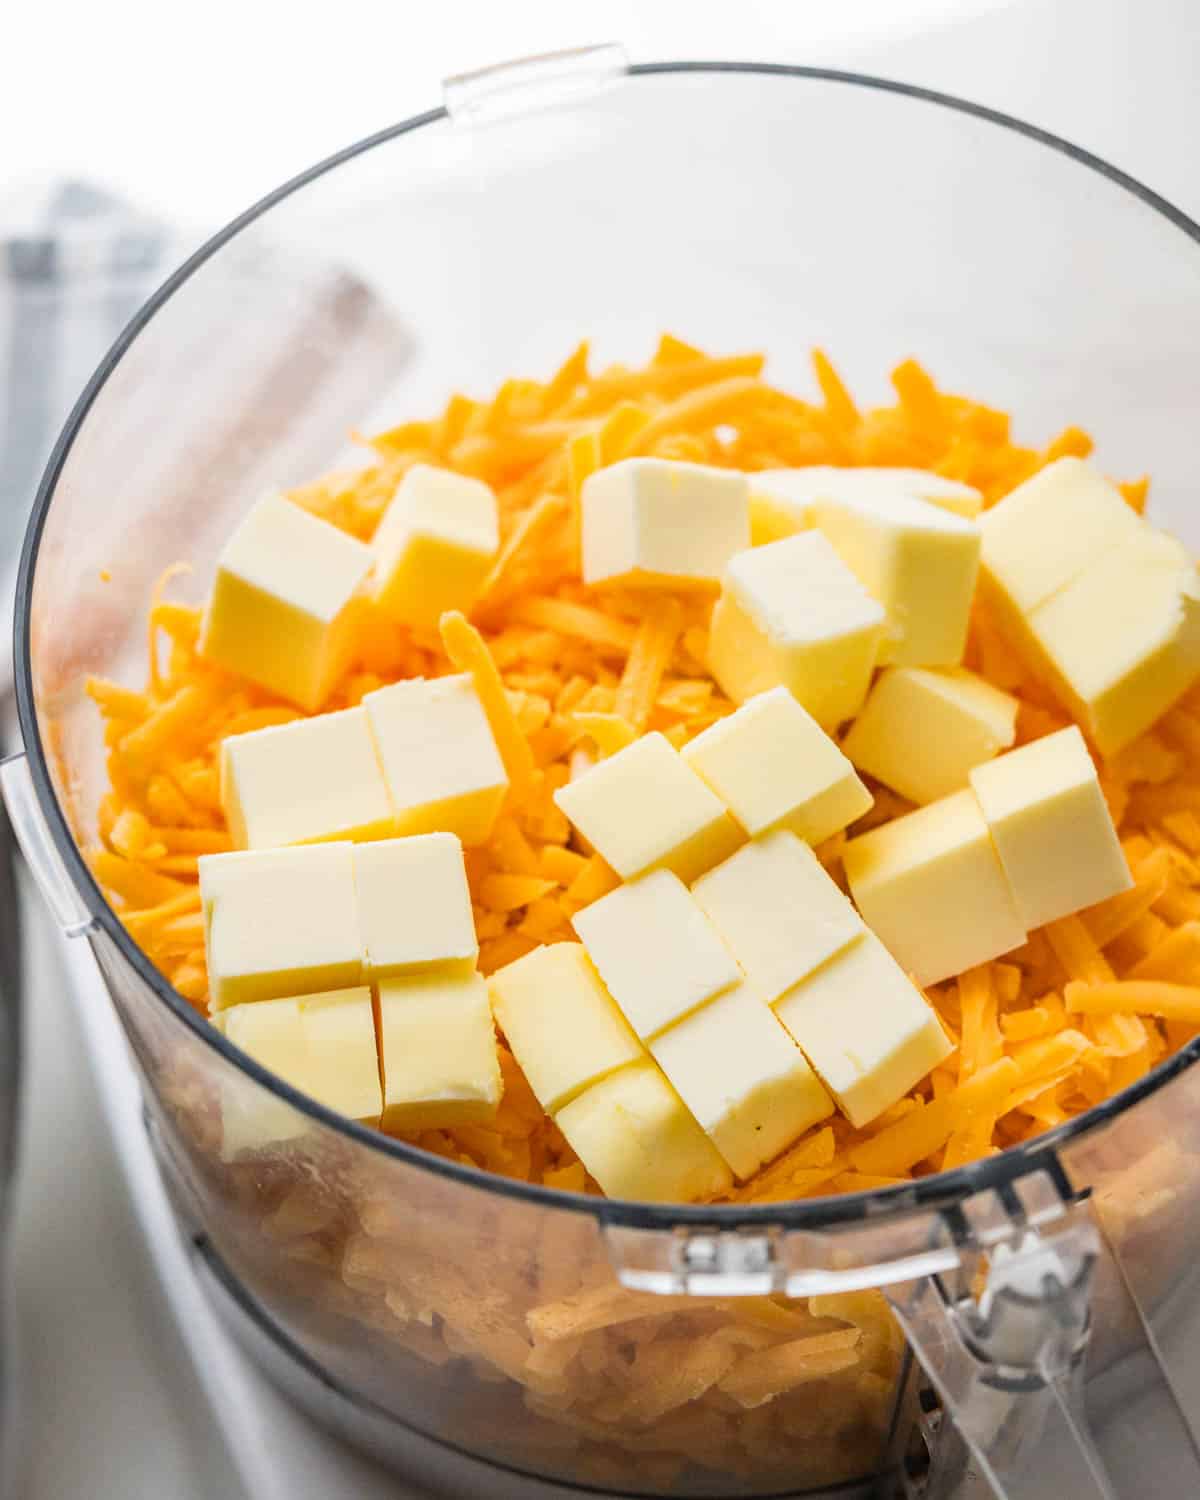 Combining shredded cheddar cheese and diced butter in a food processor.